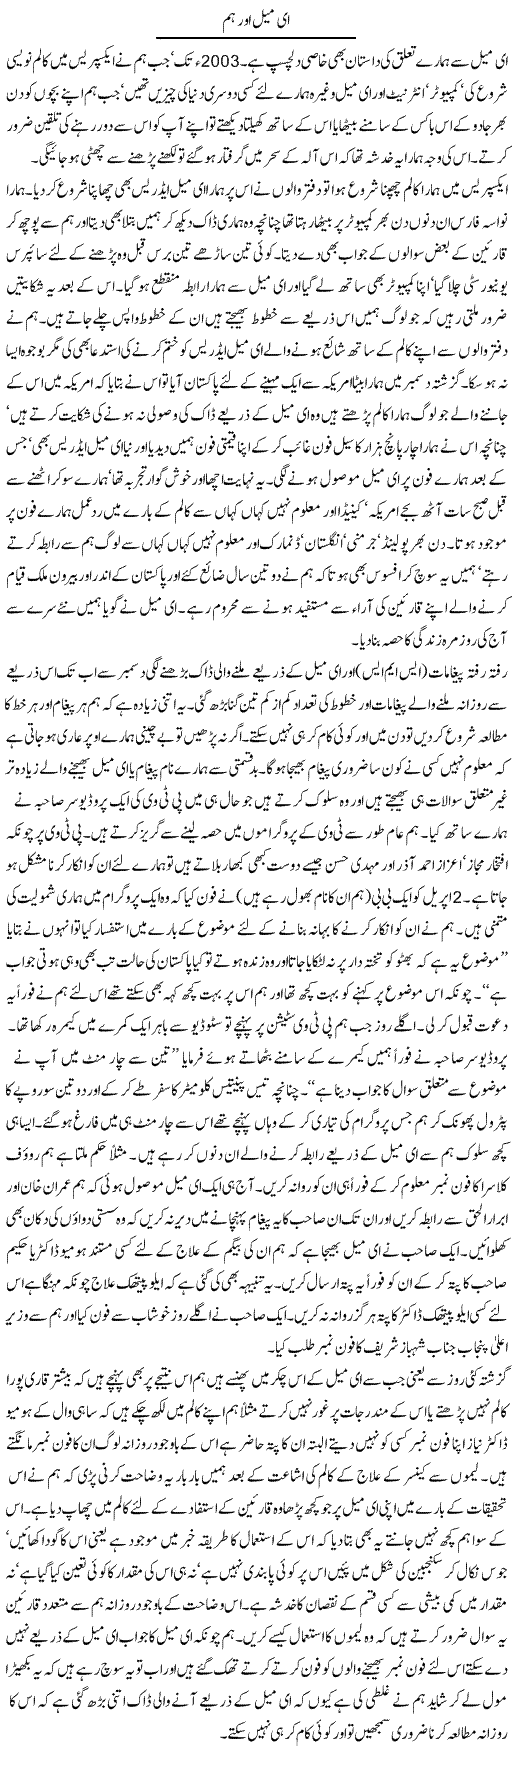 Email and US Express Column Hameed Akhtar 14 April 2011